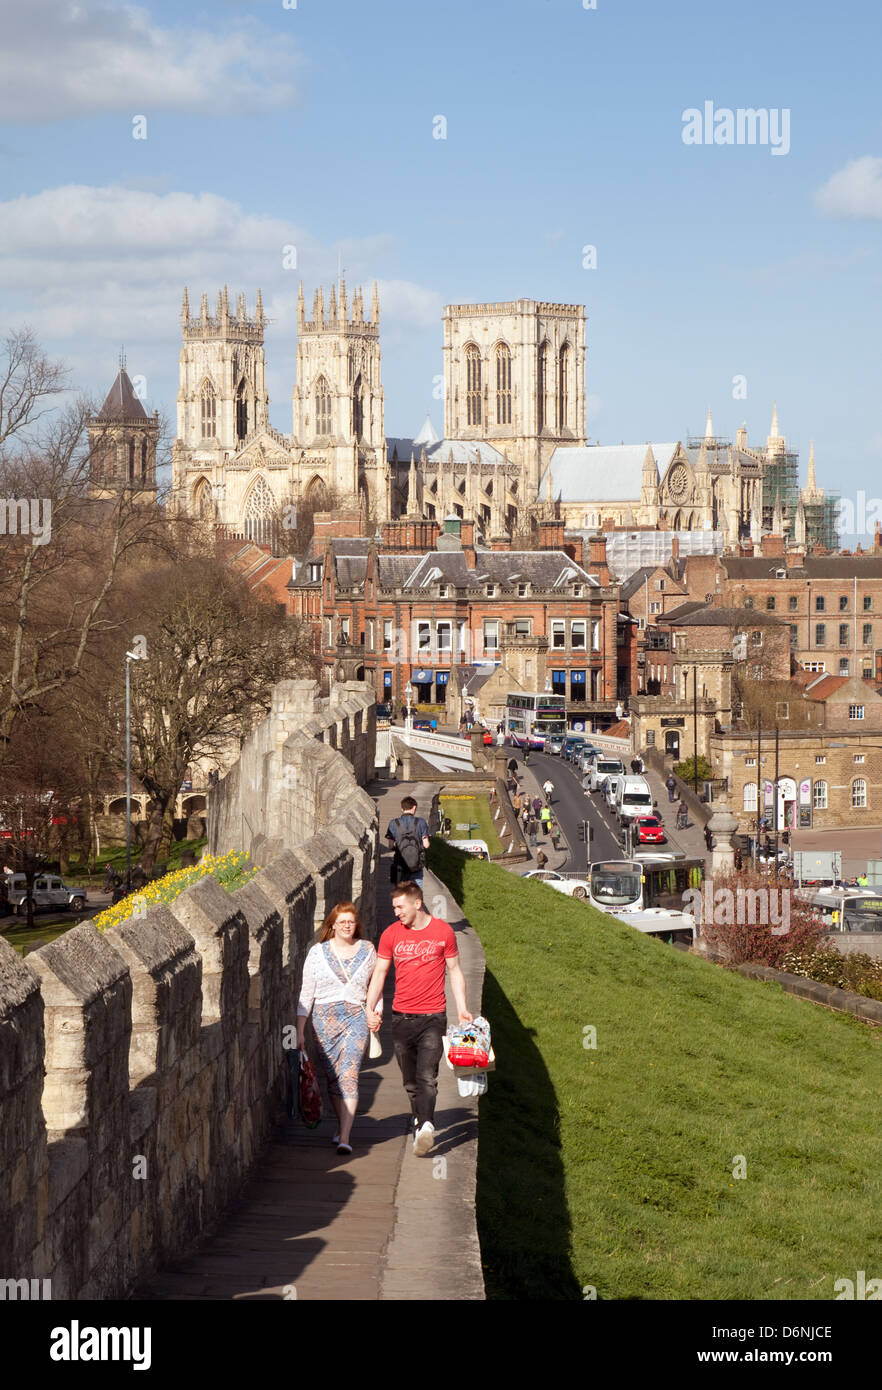 York city walls; People walking the old city walls with York Minster cathedral in the background, York, Yorkshire UK Stock Photo